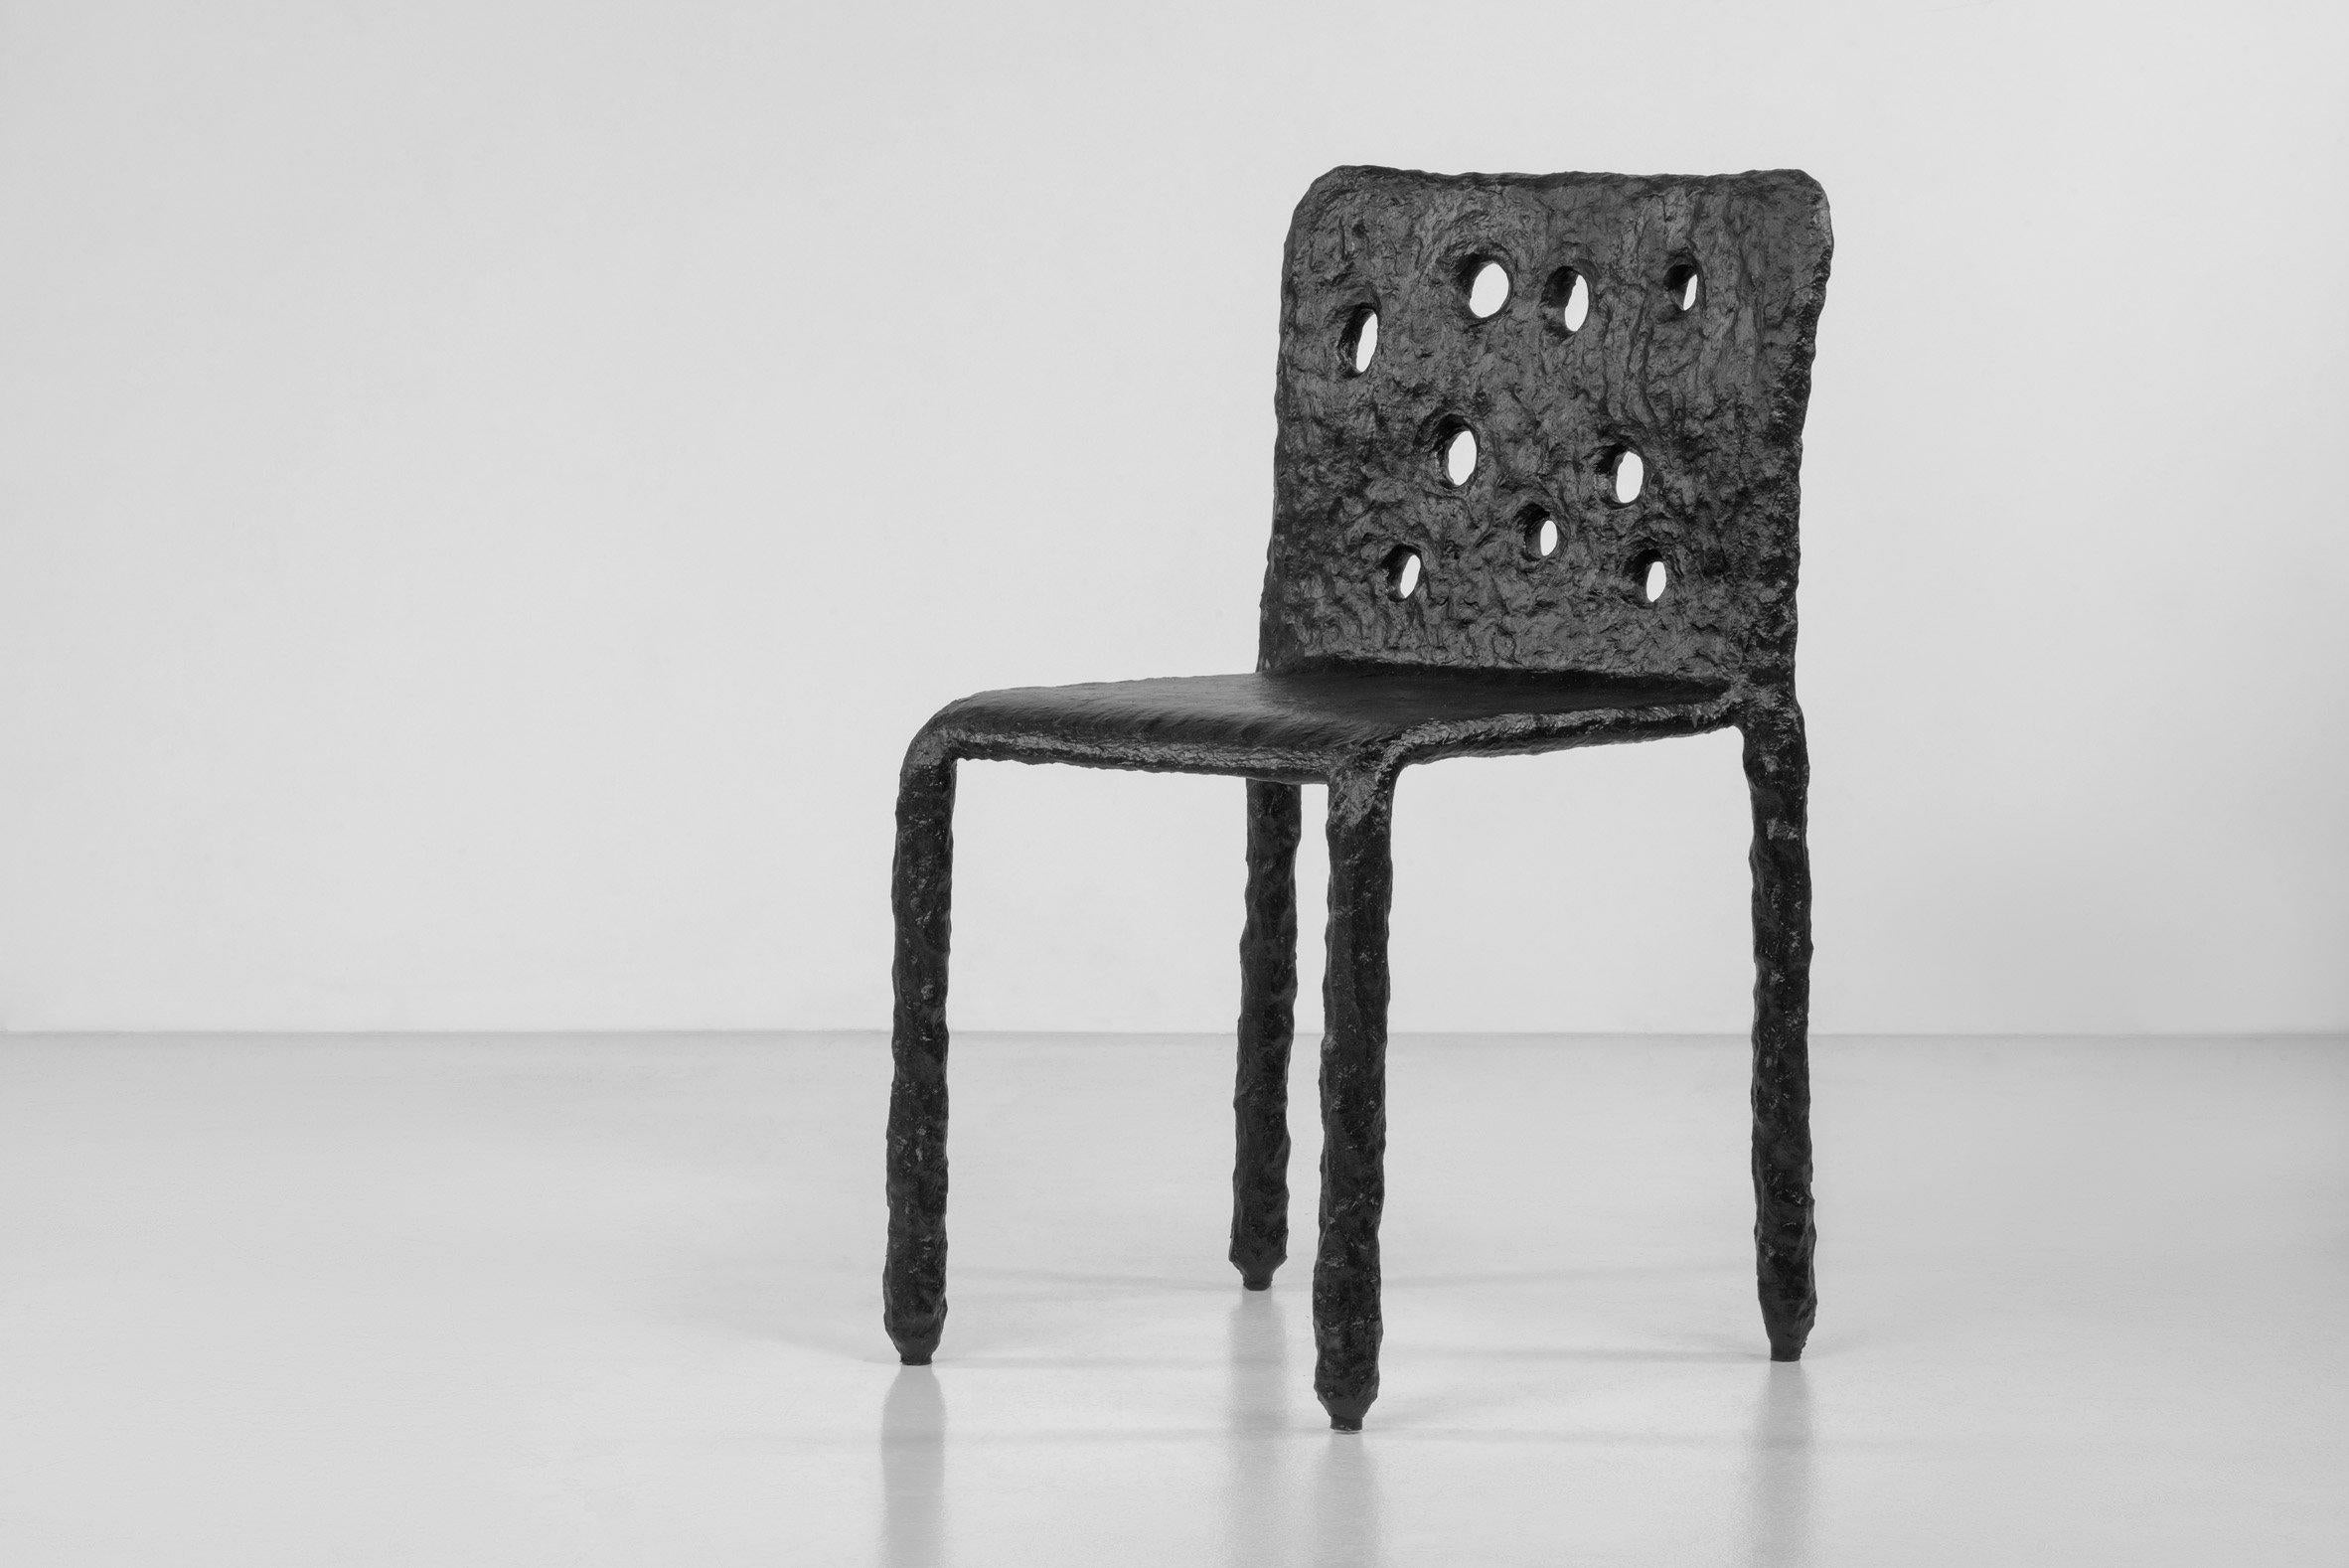 Sculpted contemporary black chair - Ztista Chair by Faina

Design: Victoriya Yakusha
Material: steel, flax rubber, biopolymer, cellulose
Dimensions: 48 x 50 x h82 cm, seat height: 47 cm
Handcrafted in Ukraine

Chair Ztista (“ztista” in